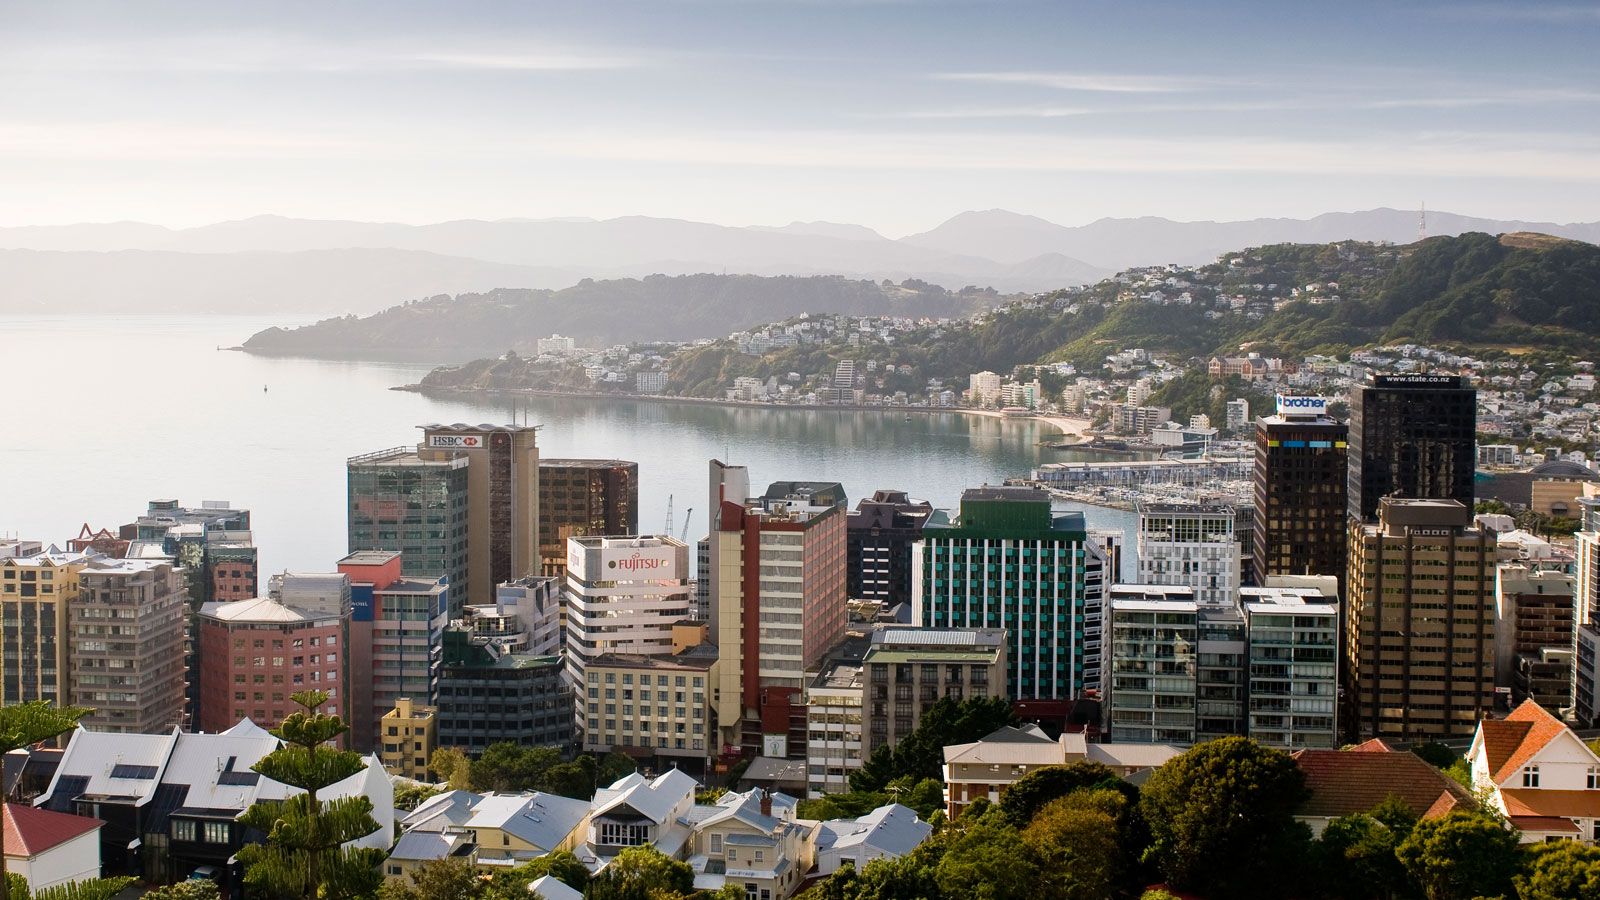 Aerial view of Wellington looking over the city and out over the water.